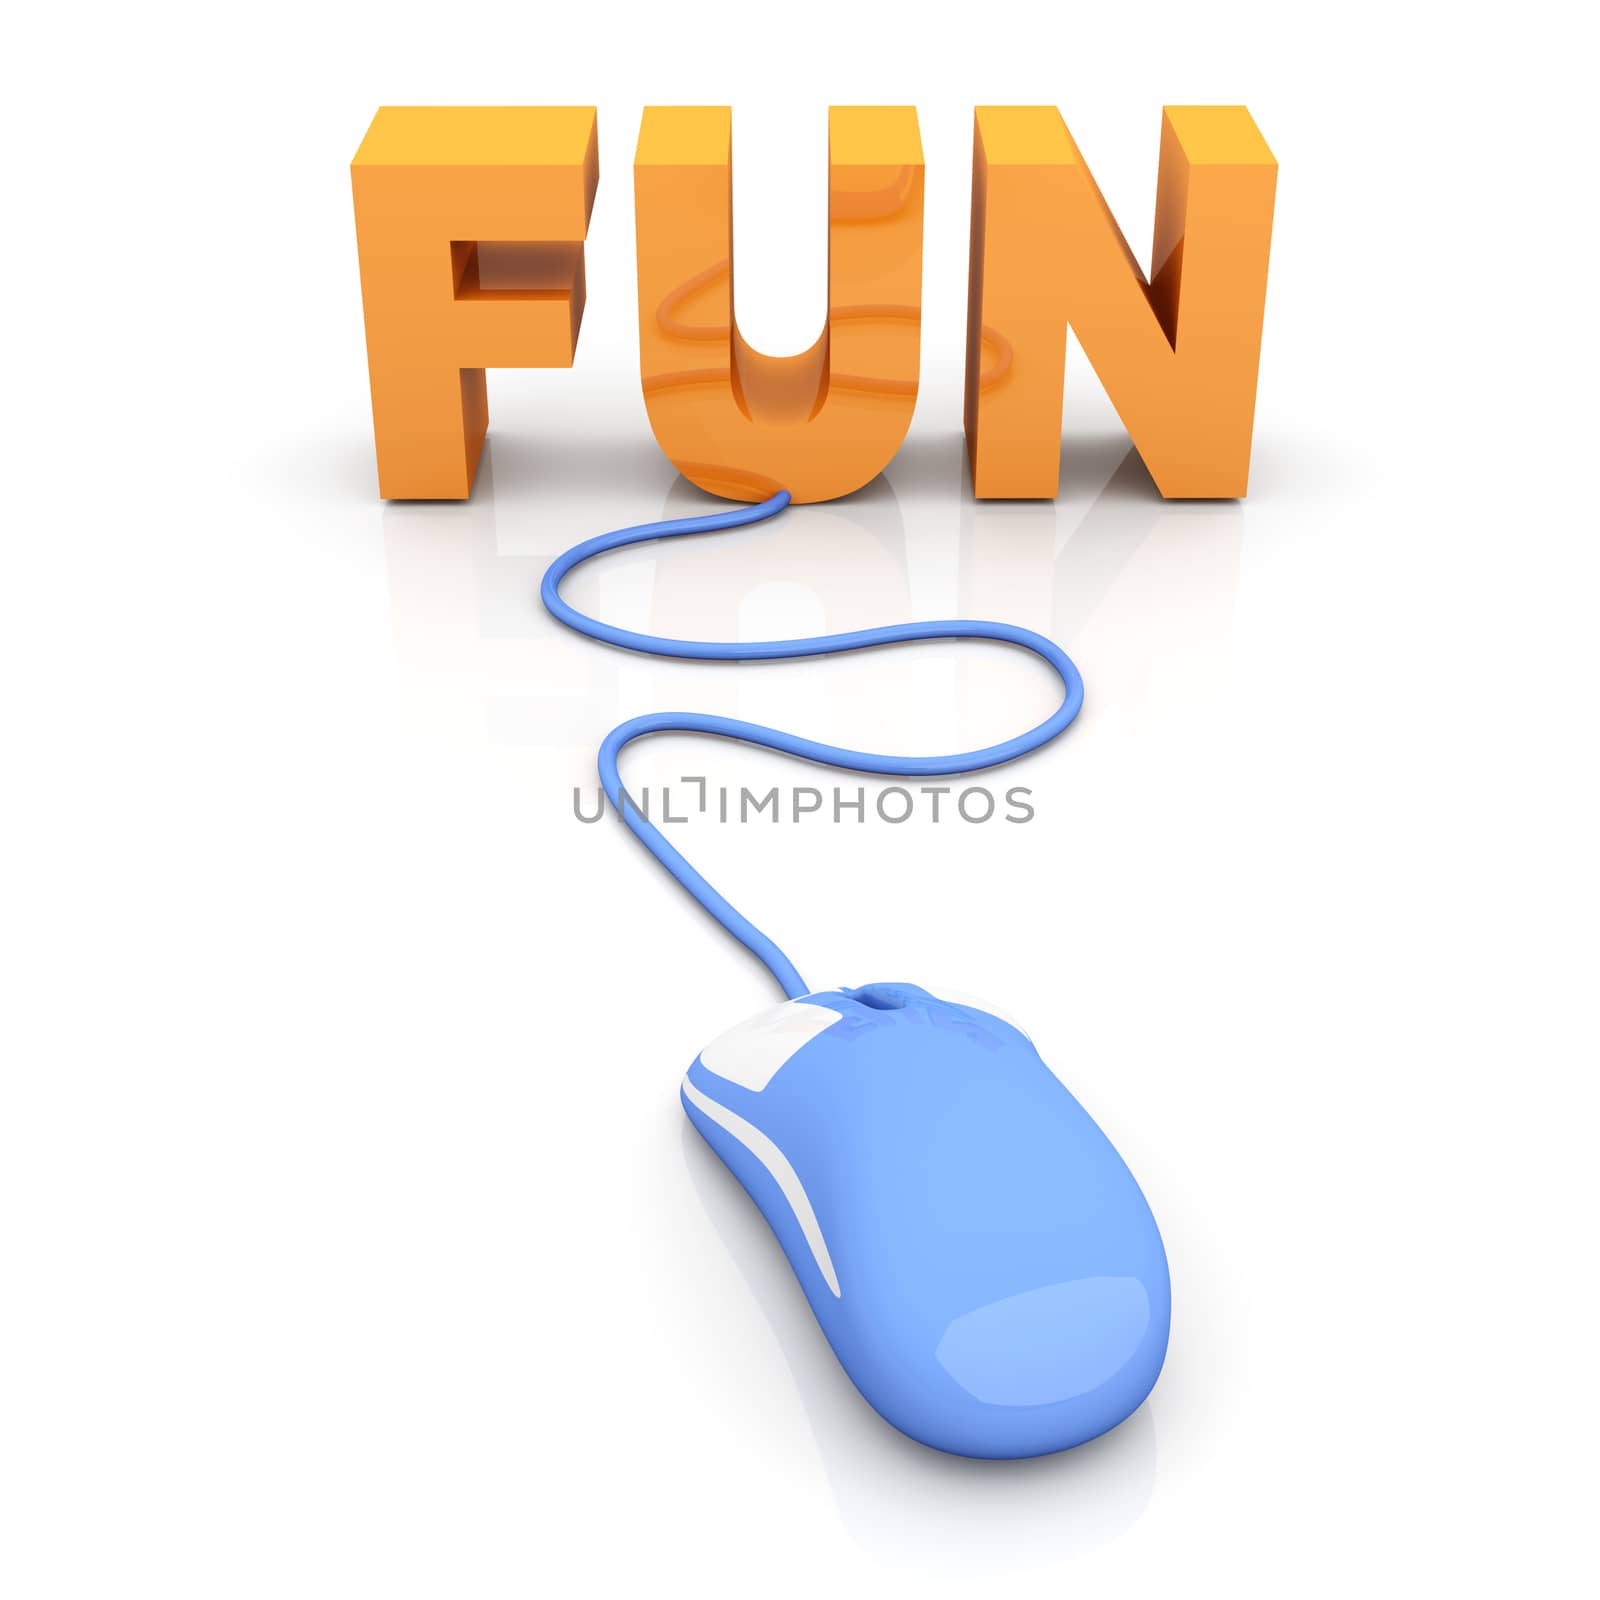 Fun online. 3D rendered Illustration. Isolated on white.